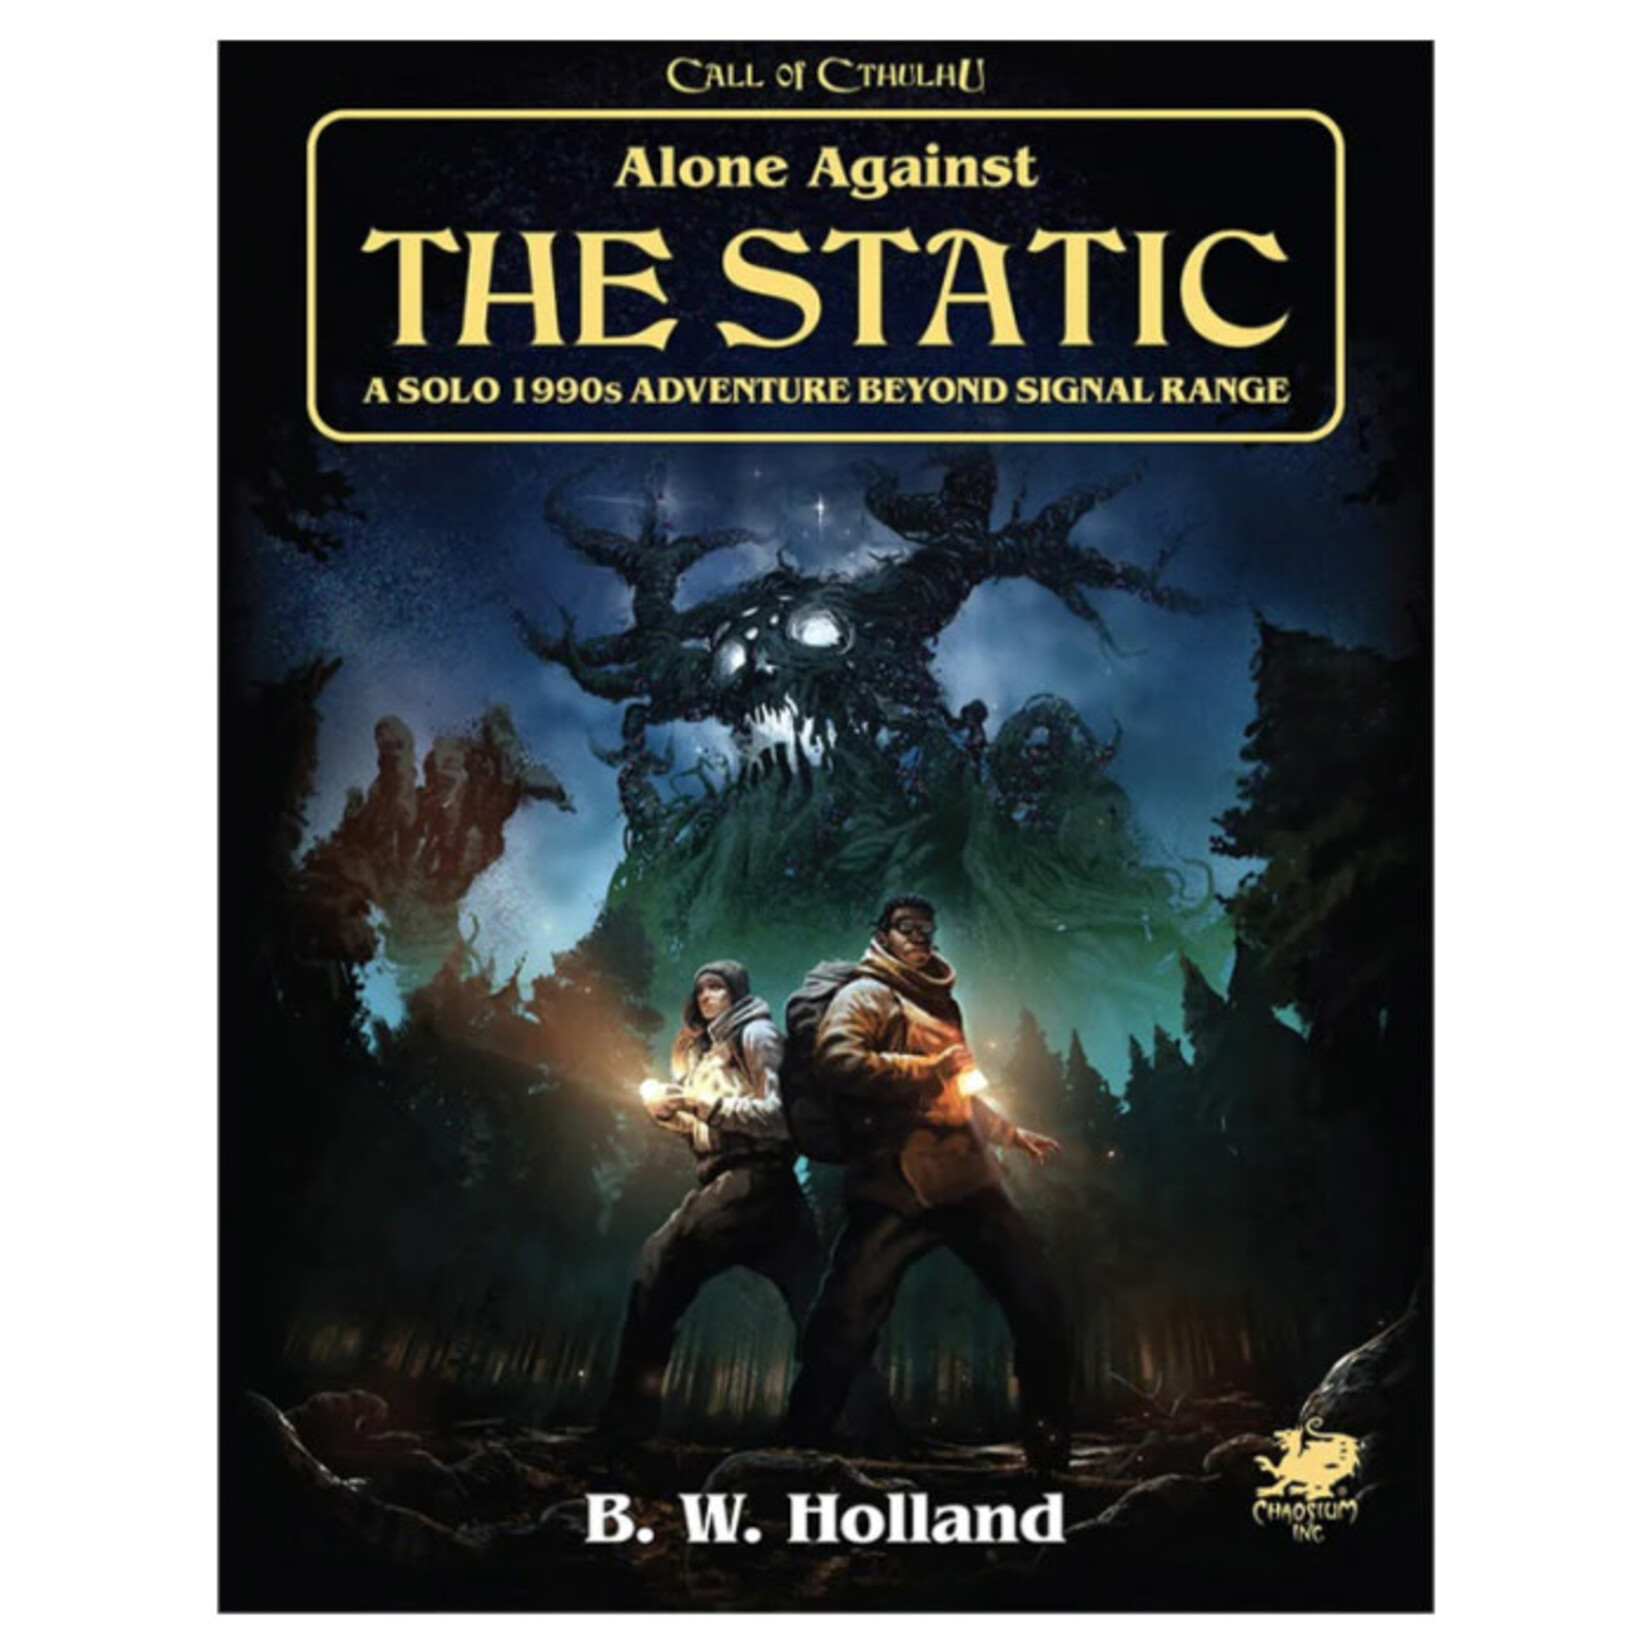 Chaosium Call of Cthulhu: Alone Against The Static Solo Adventure